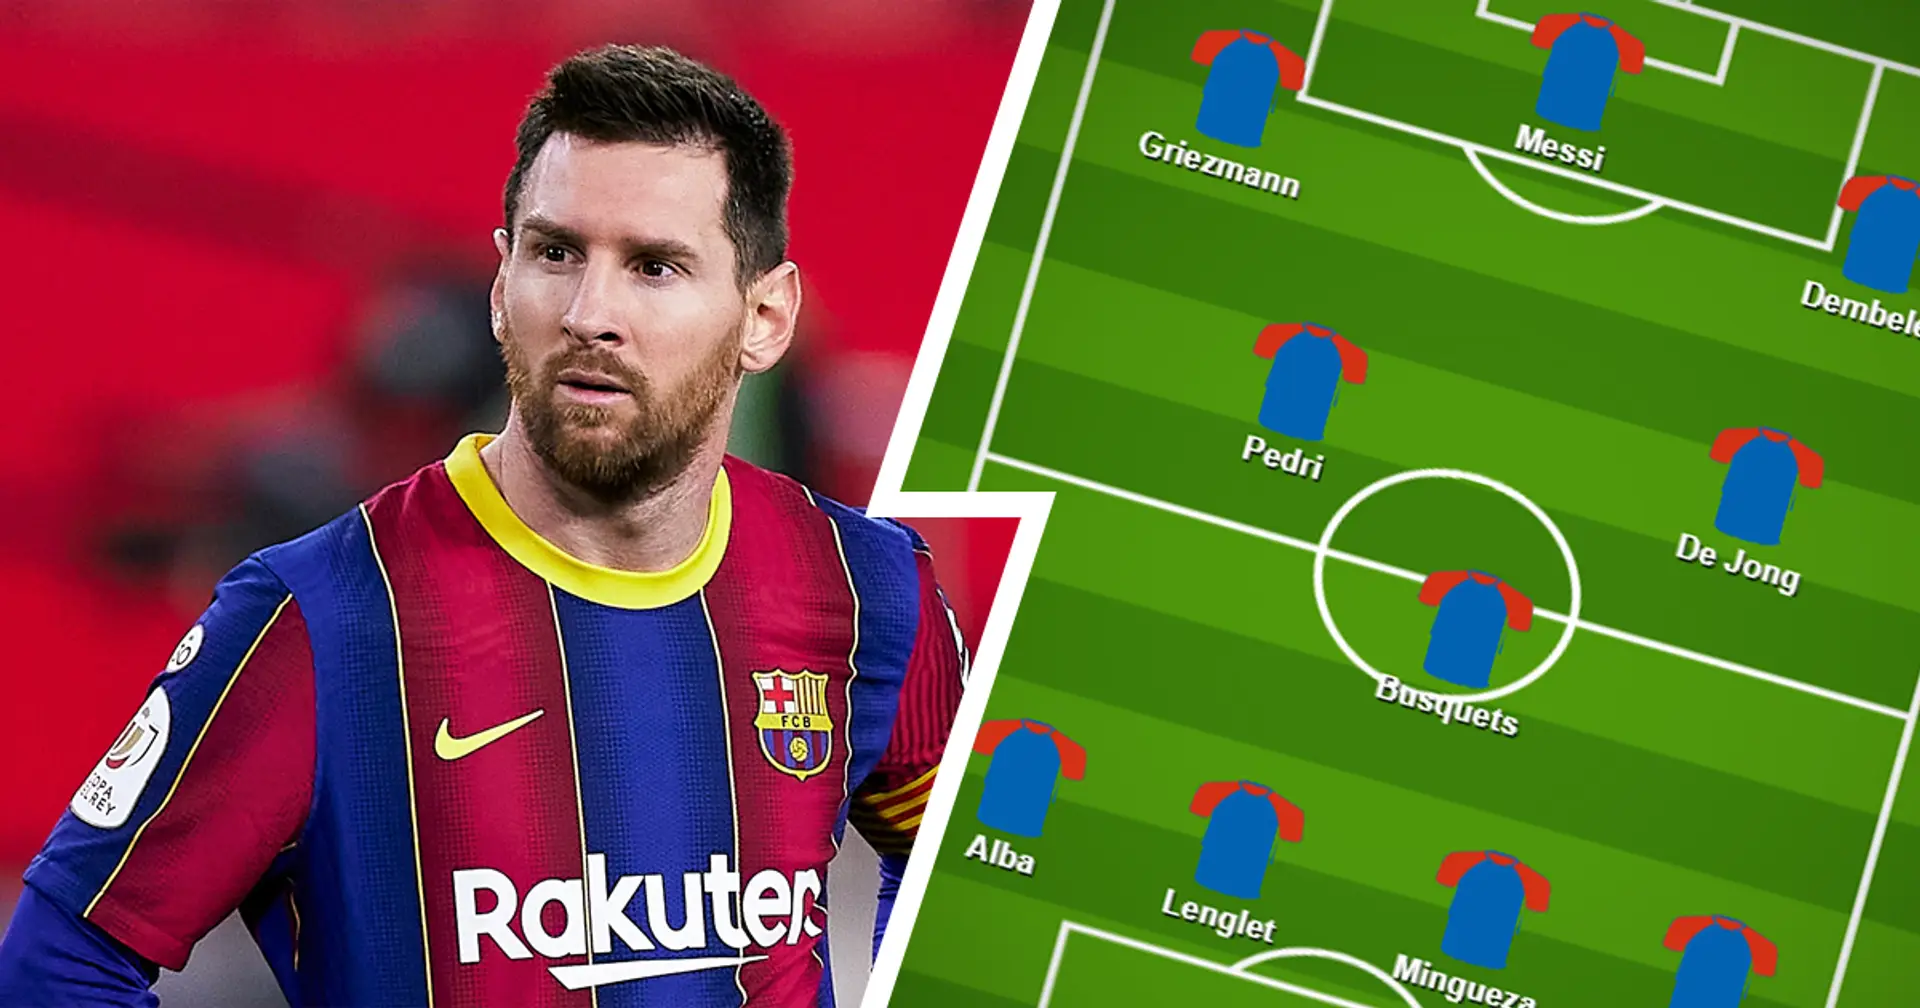 PSG vs Barcelona: team news, probable lineups, score predictions and more – preview